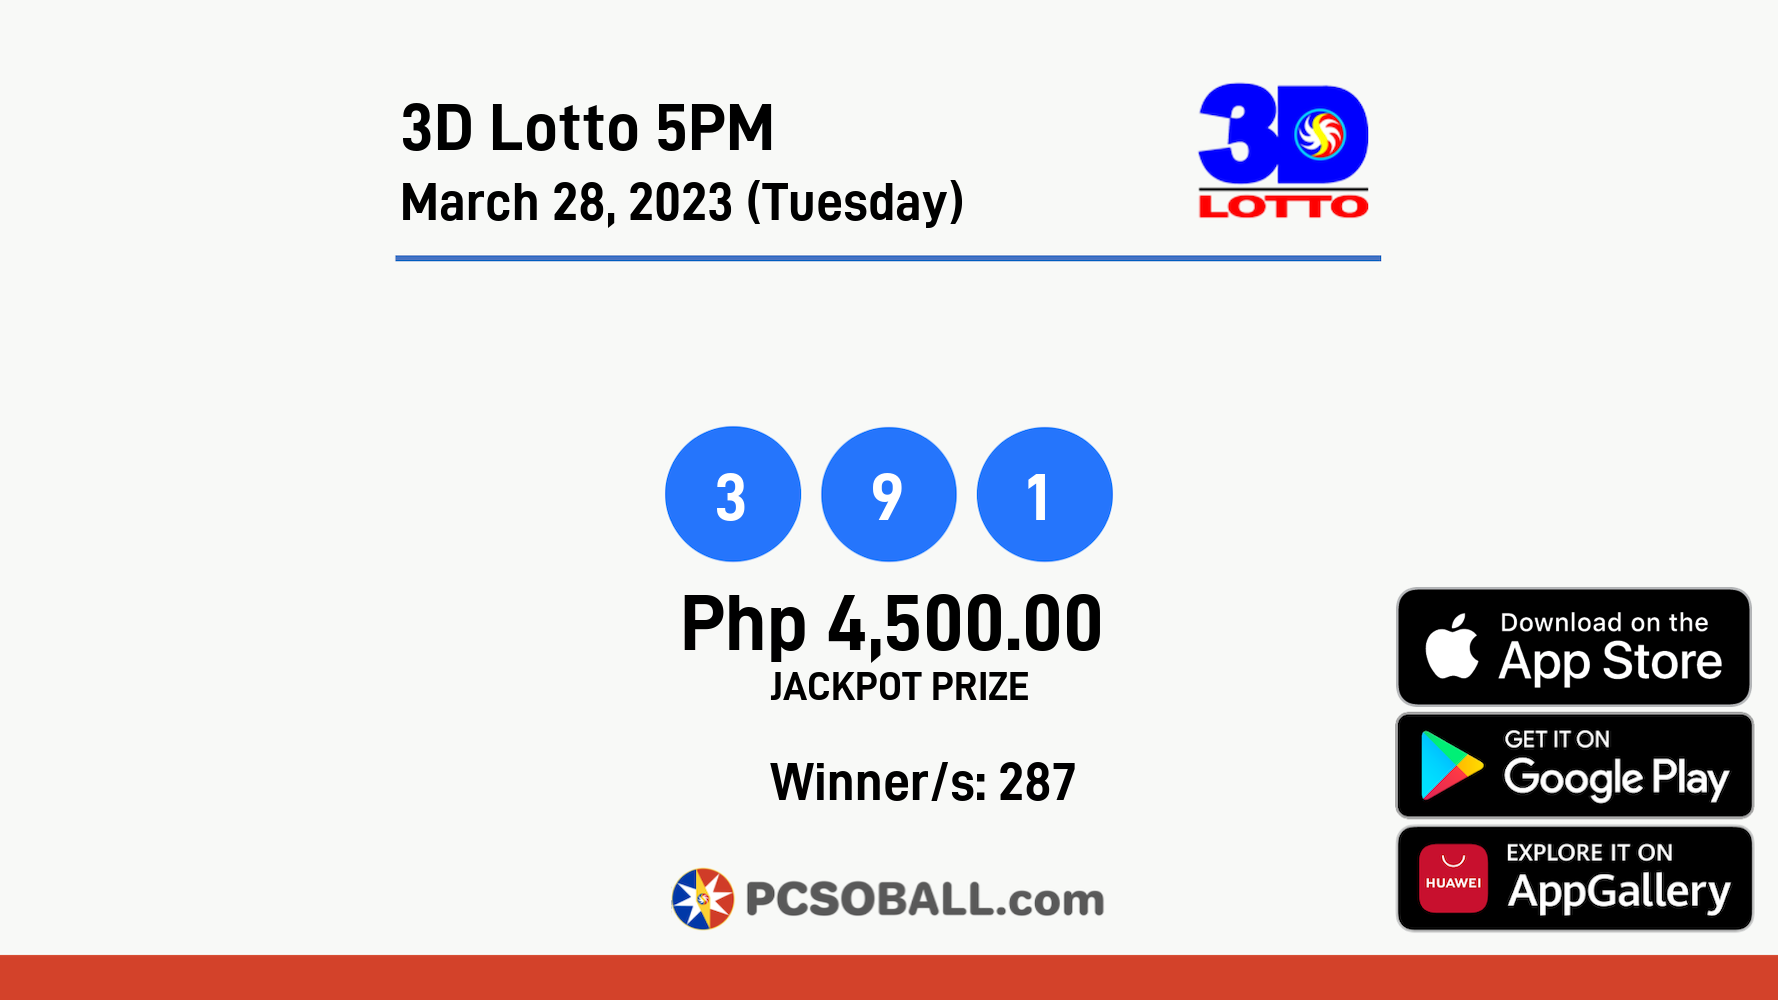 3D Lotto 5PM March 28, 2023 (Tuesday) Result